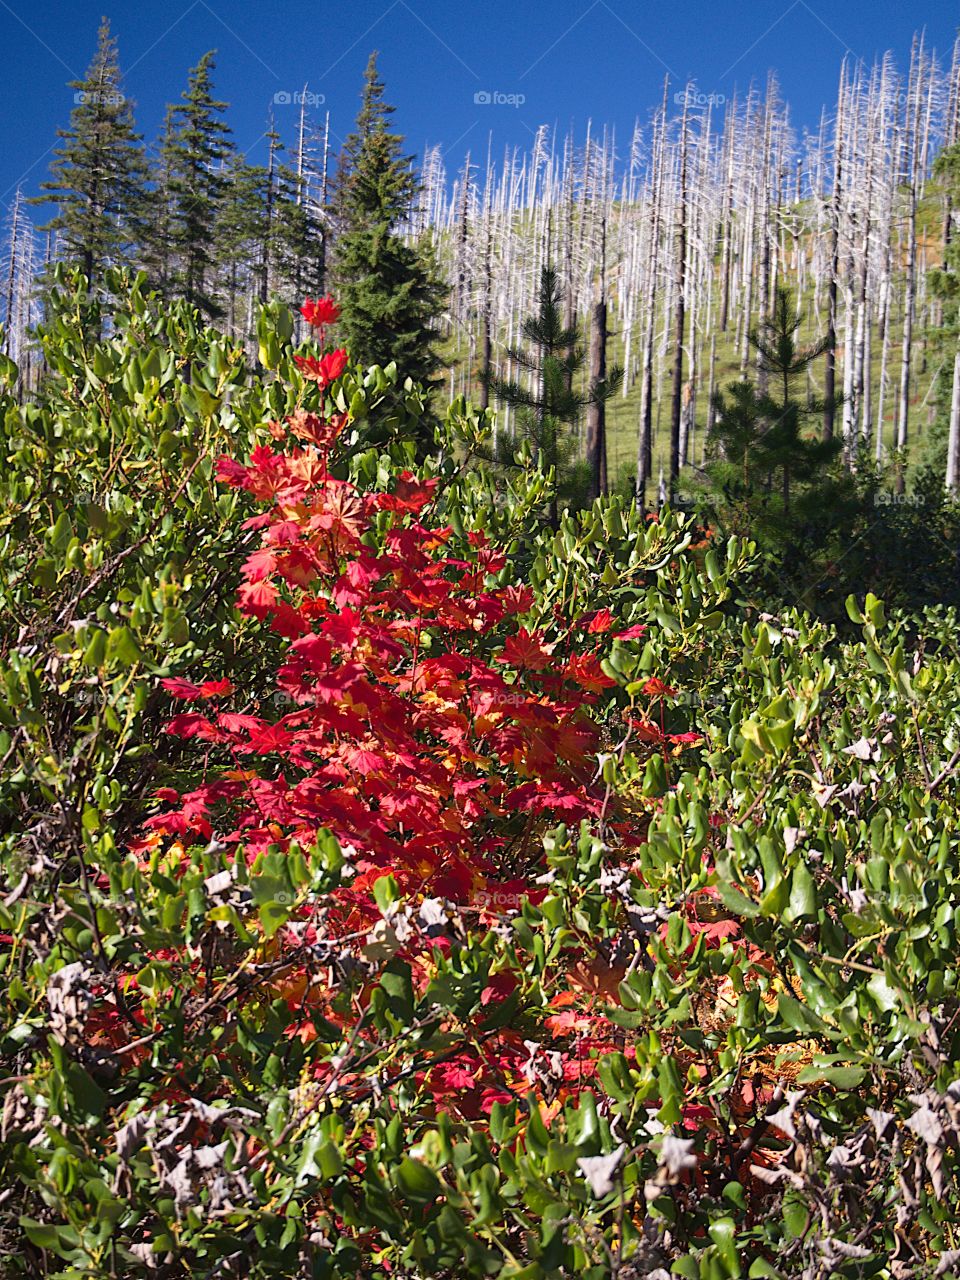 The fall colors of bright red maple tree shoots amongst manzanita bushes on a sunny fall day. 